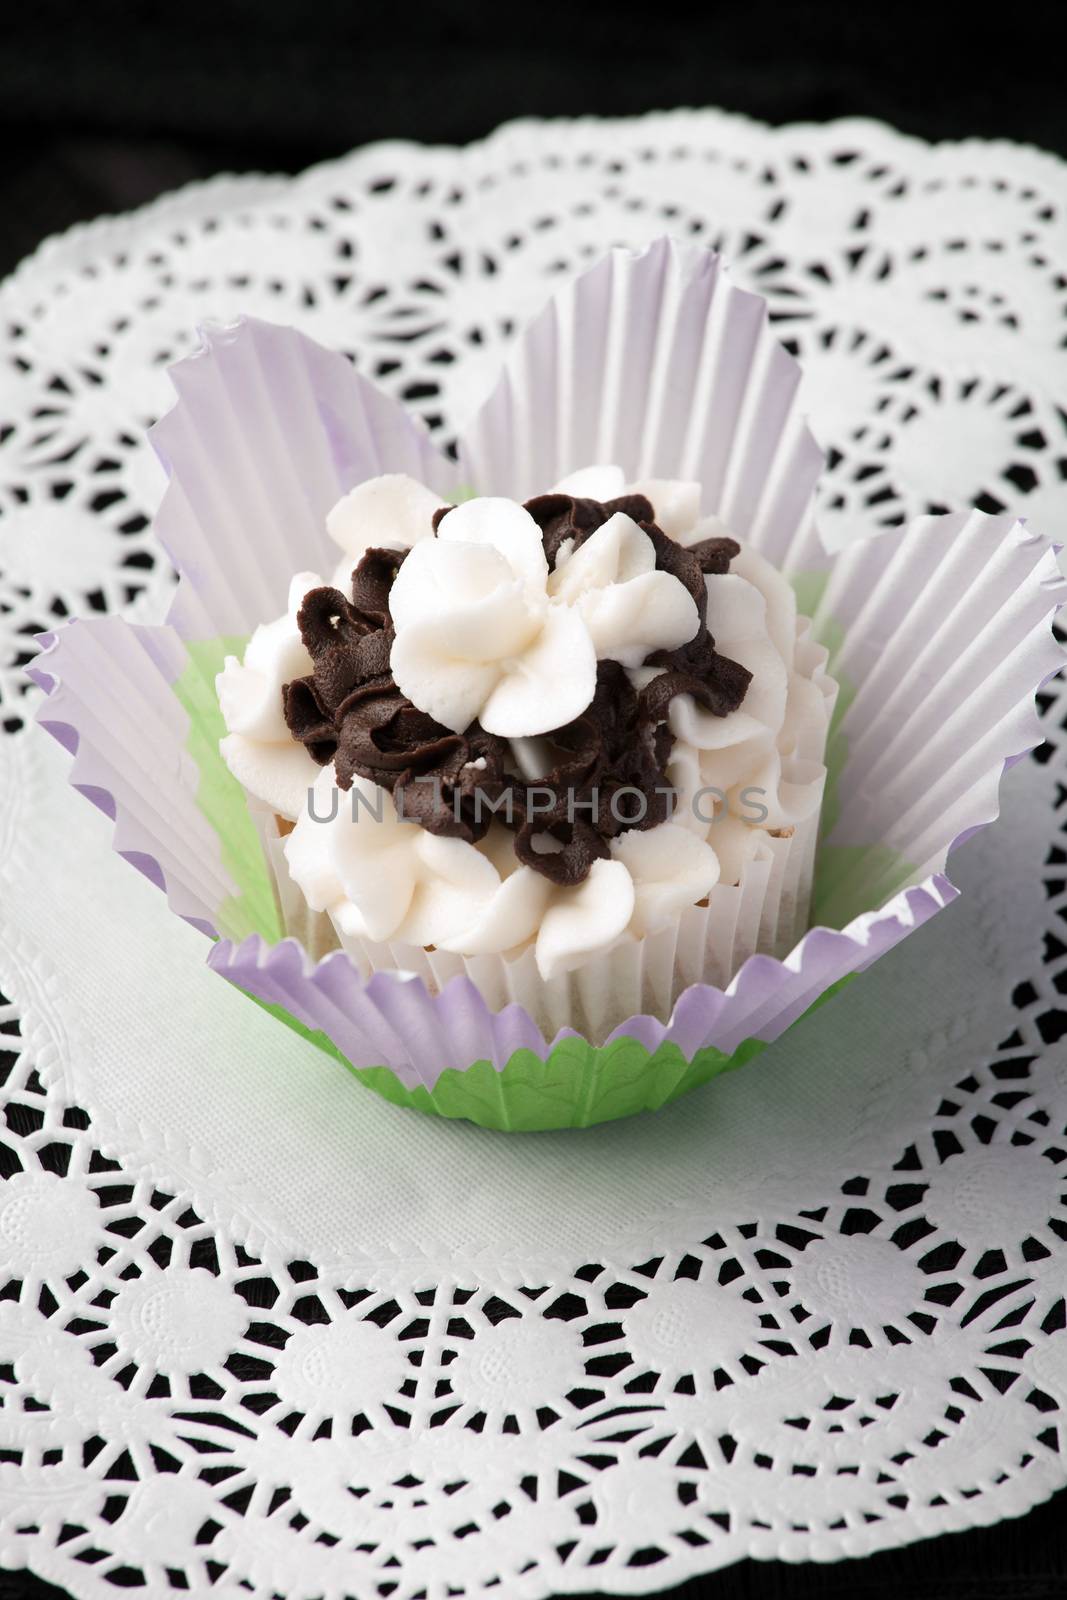 Fancy Gourmet Cupcake by graficallyminded